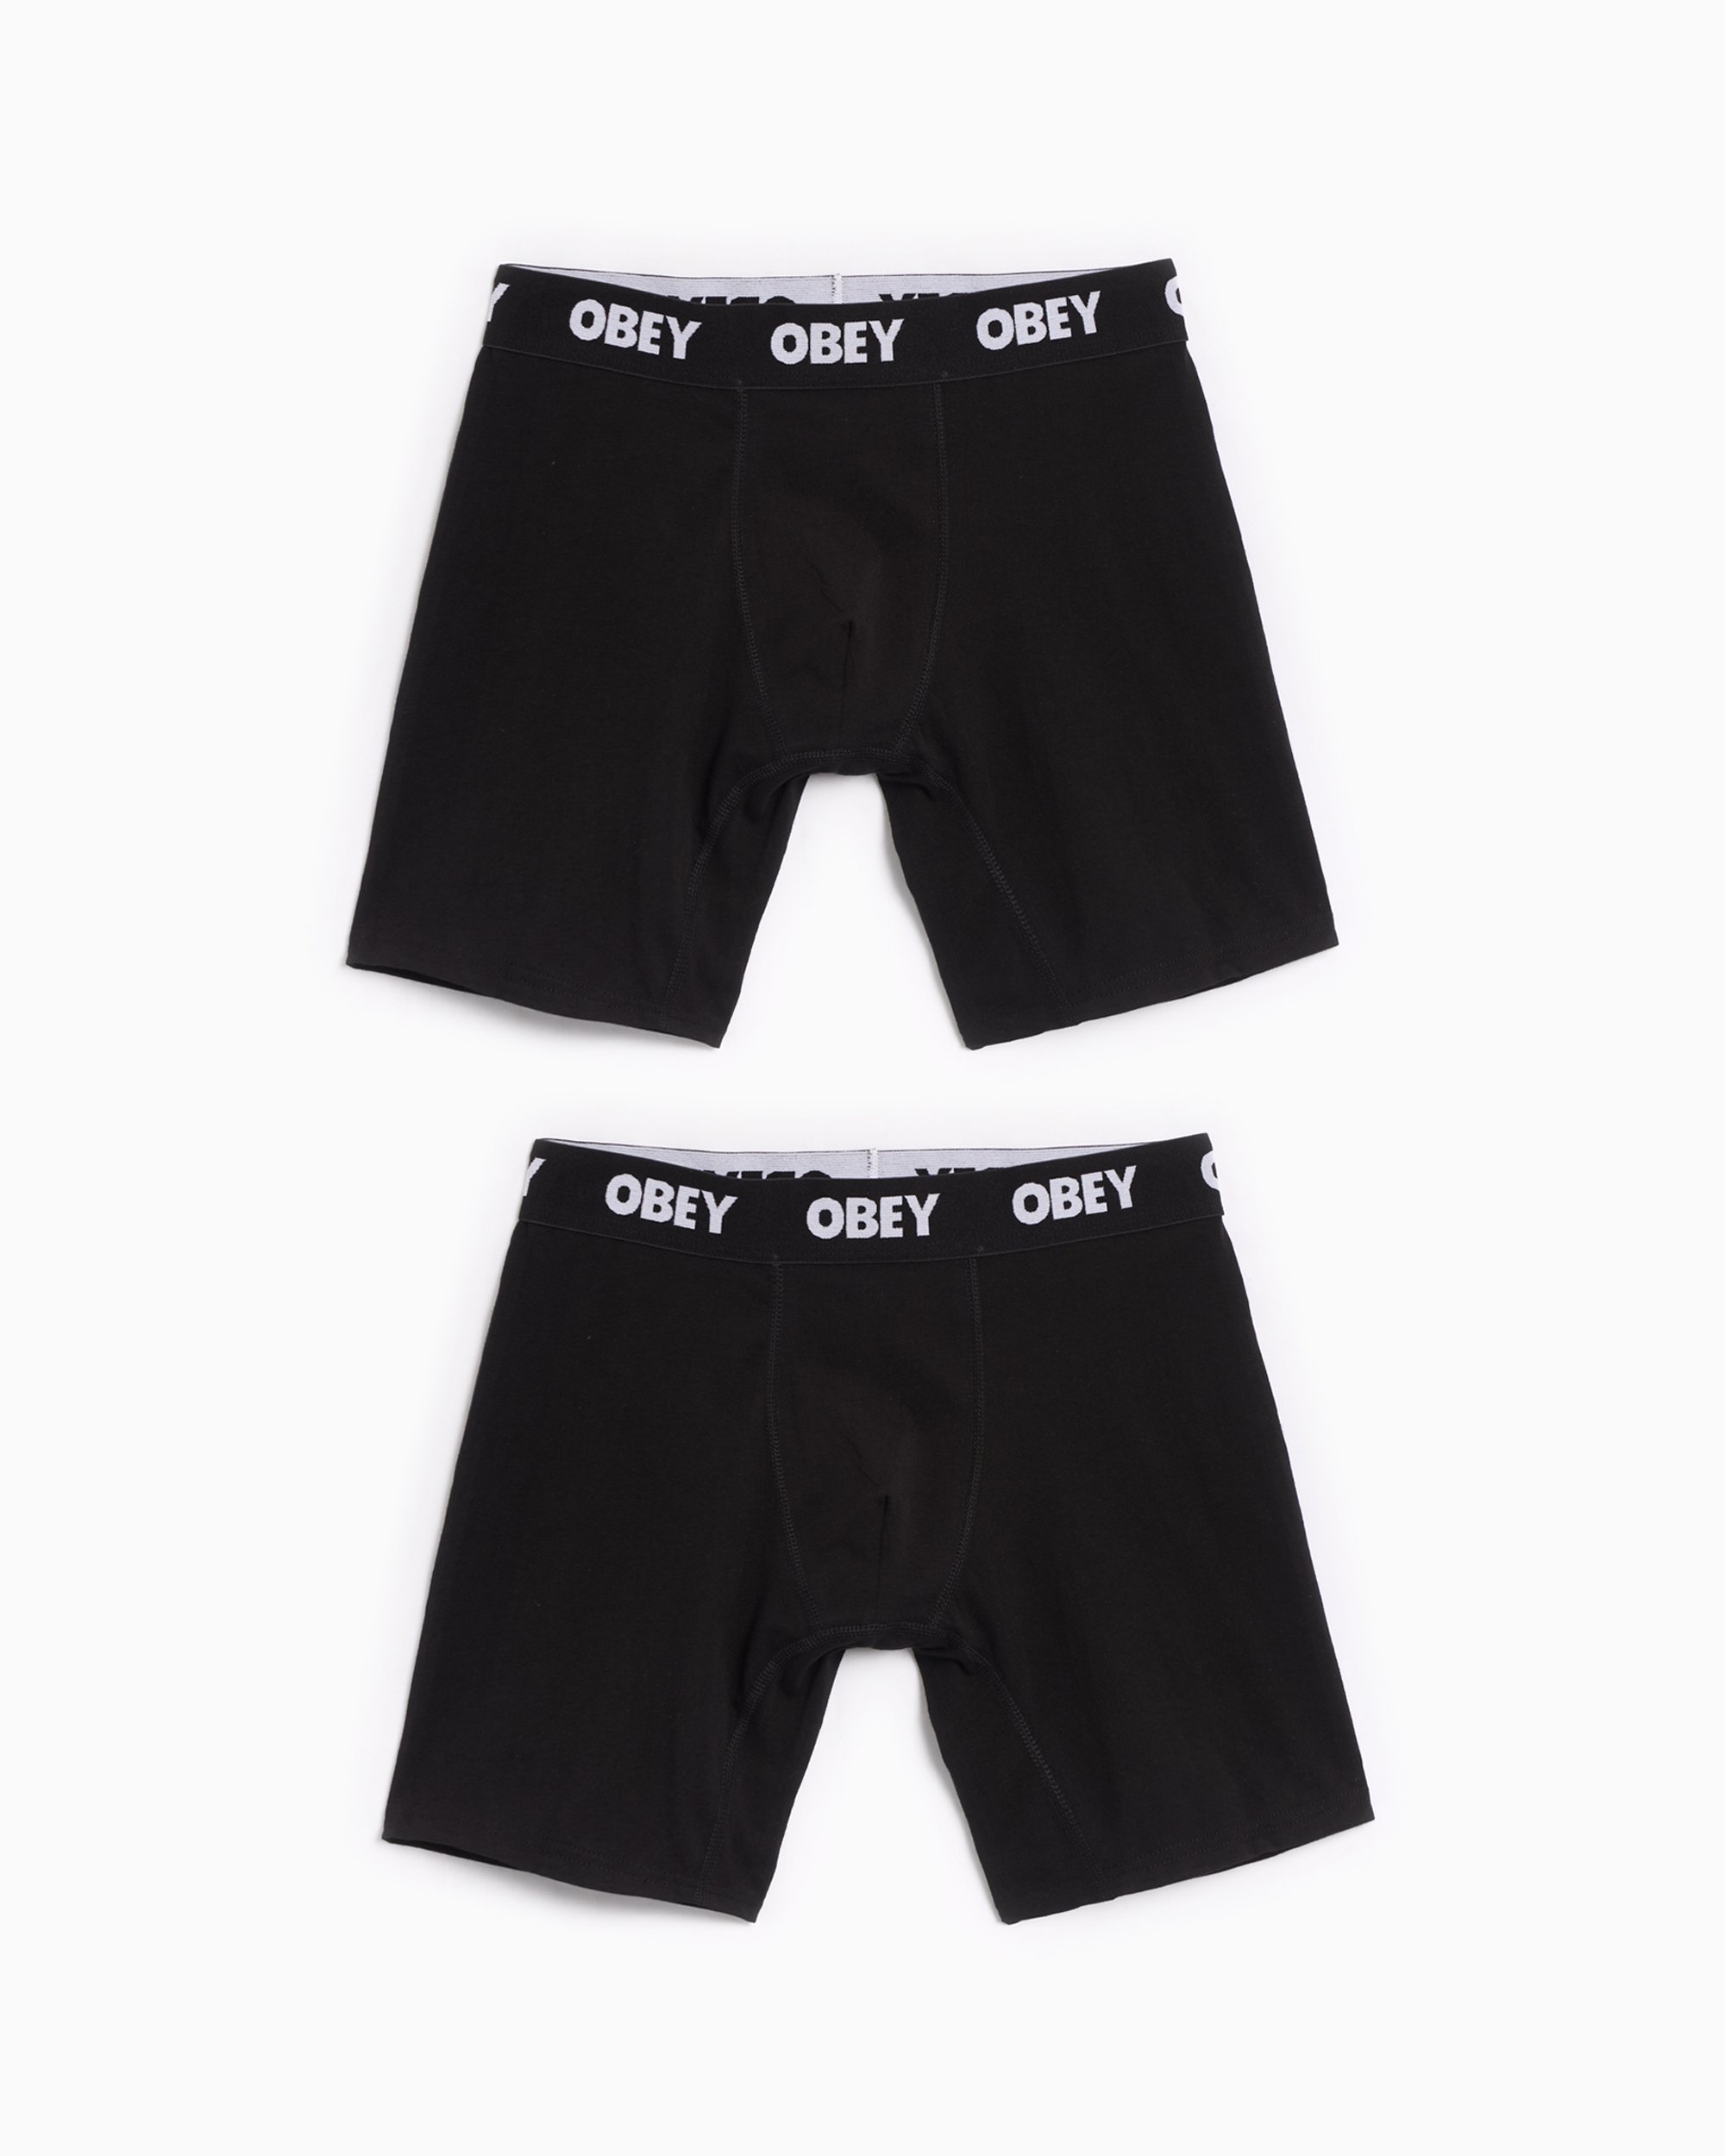 Underwear - Project Clothing